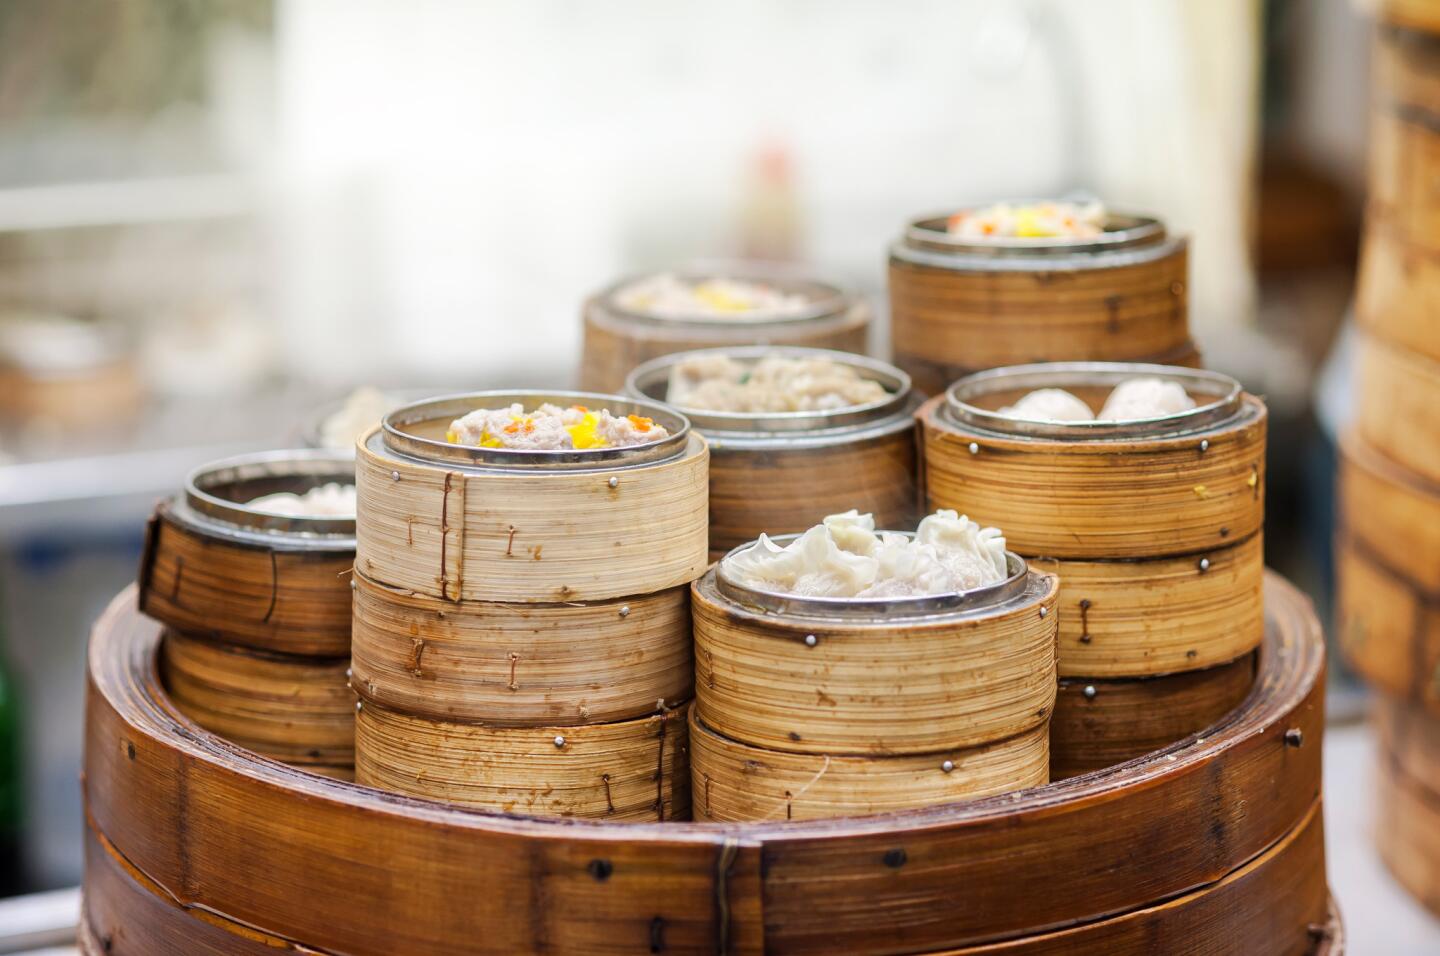 Hong Kong dim sum is the definitive version. DimDimSum’s siu mai (steamed pork dumplings), har gow (steamed shrimp dumplings) and char siu bao (BBQ pork steamed buns) are rated excellent. The atmosphere is buzzing with students, travelers and lovers of dim sum on a budget.